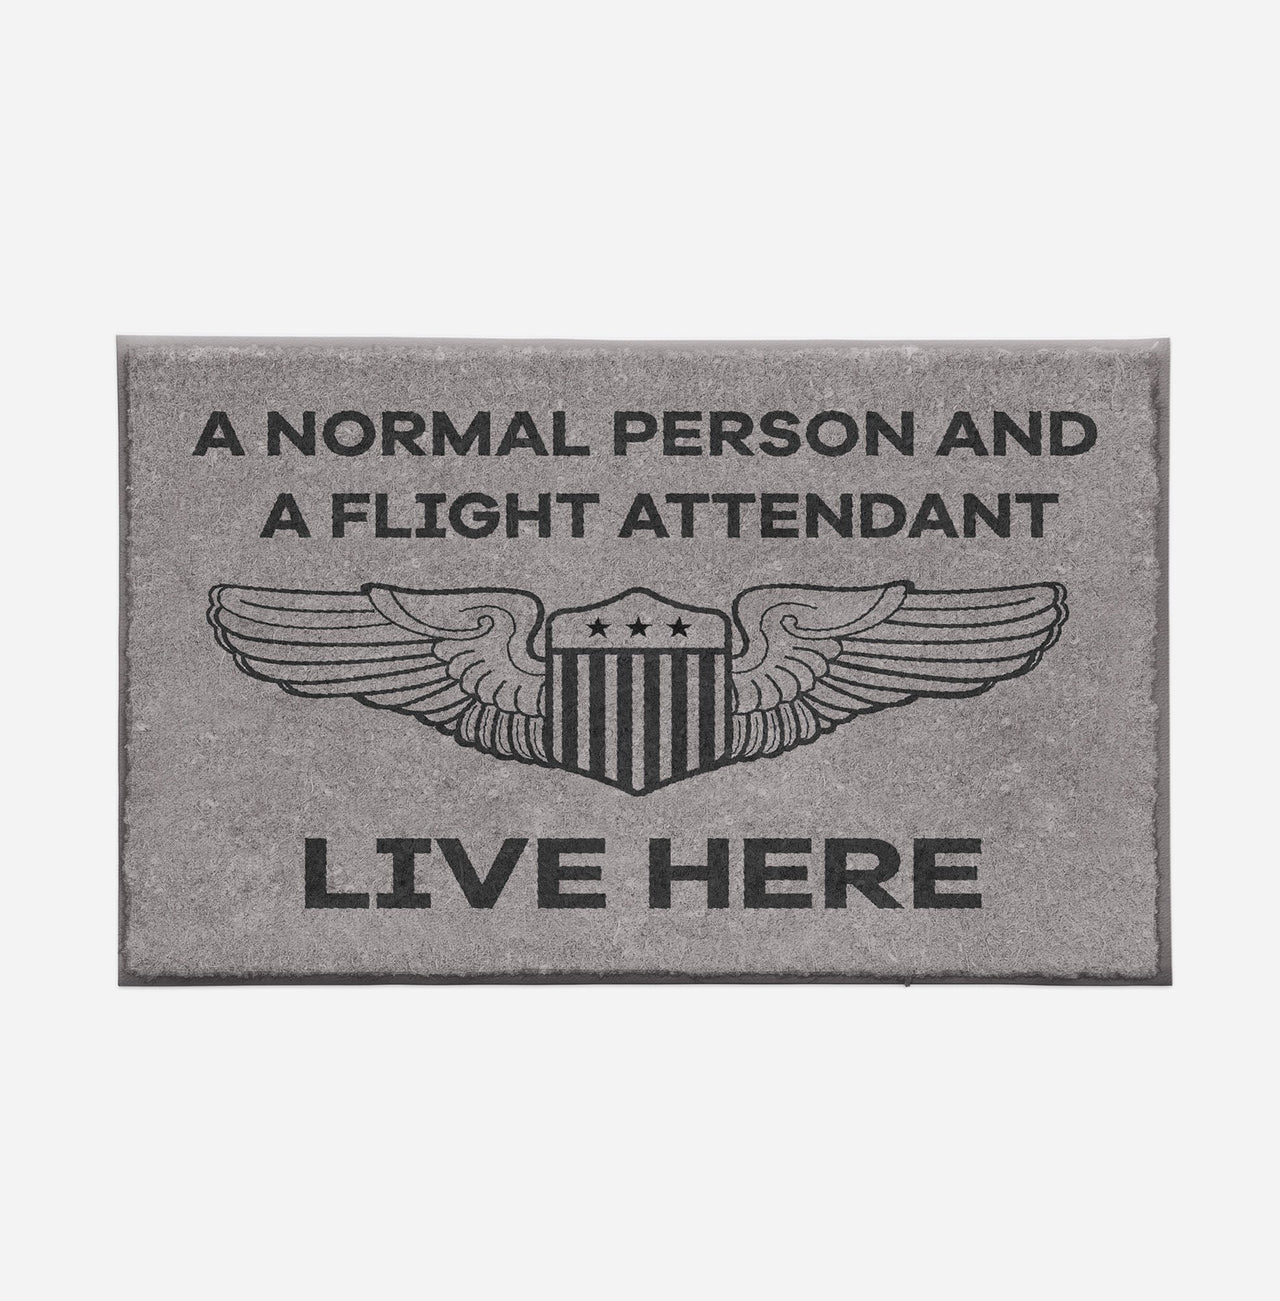 A Normal Person and a FLIGHT ATTENDANT Live Here Designed Door Mats Aviation Shop 